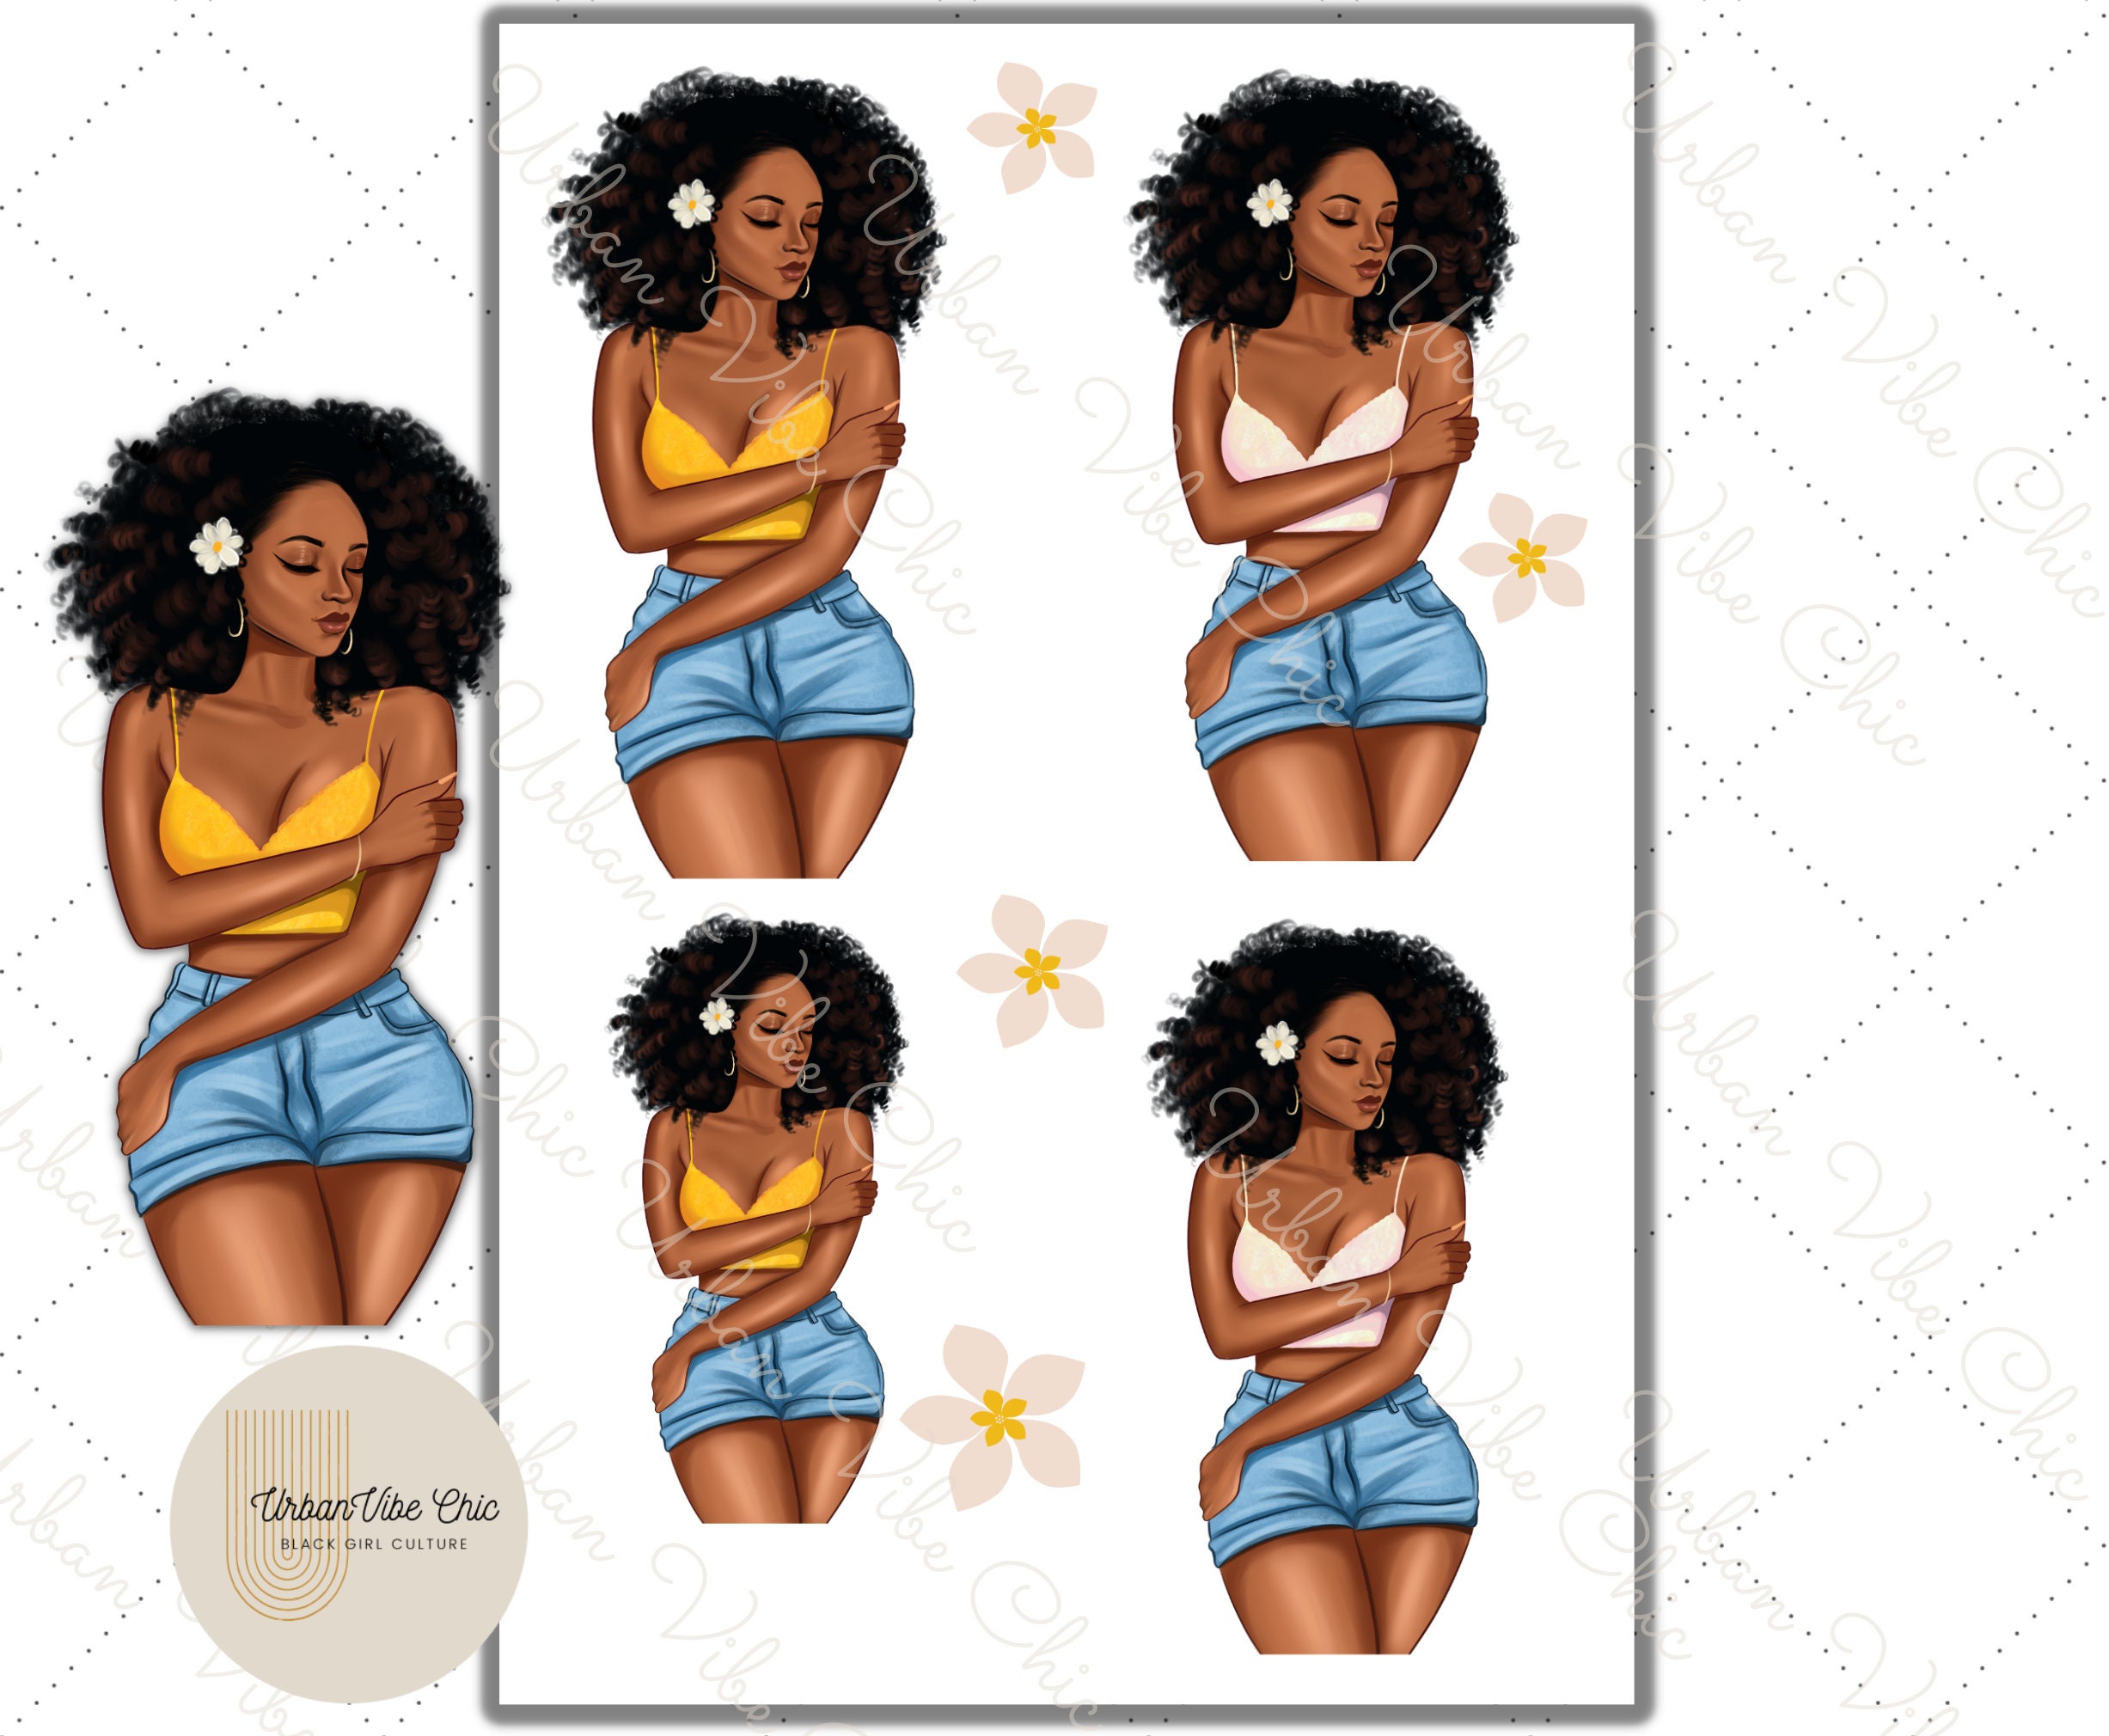 Crystals Full Sheet - Black Girl Planner Stickers – Urban Vibe Chic